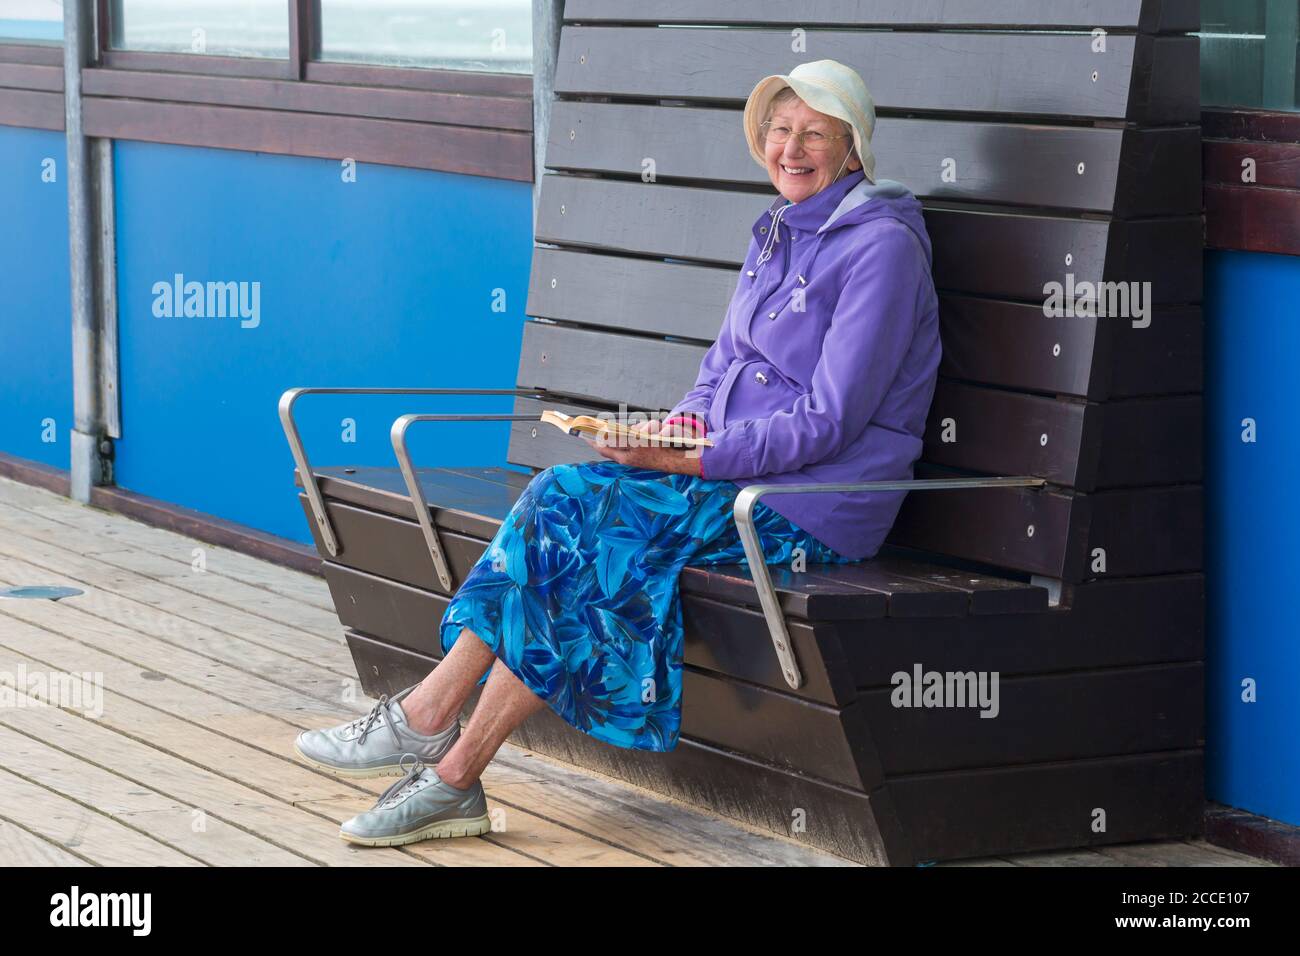 Storm Ellen brings strong wind and rough seas at Bournemouth beach, Dorset UK in August - senior lady sitting on pier reading book sheltered from wind Stock Photo